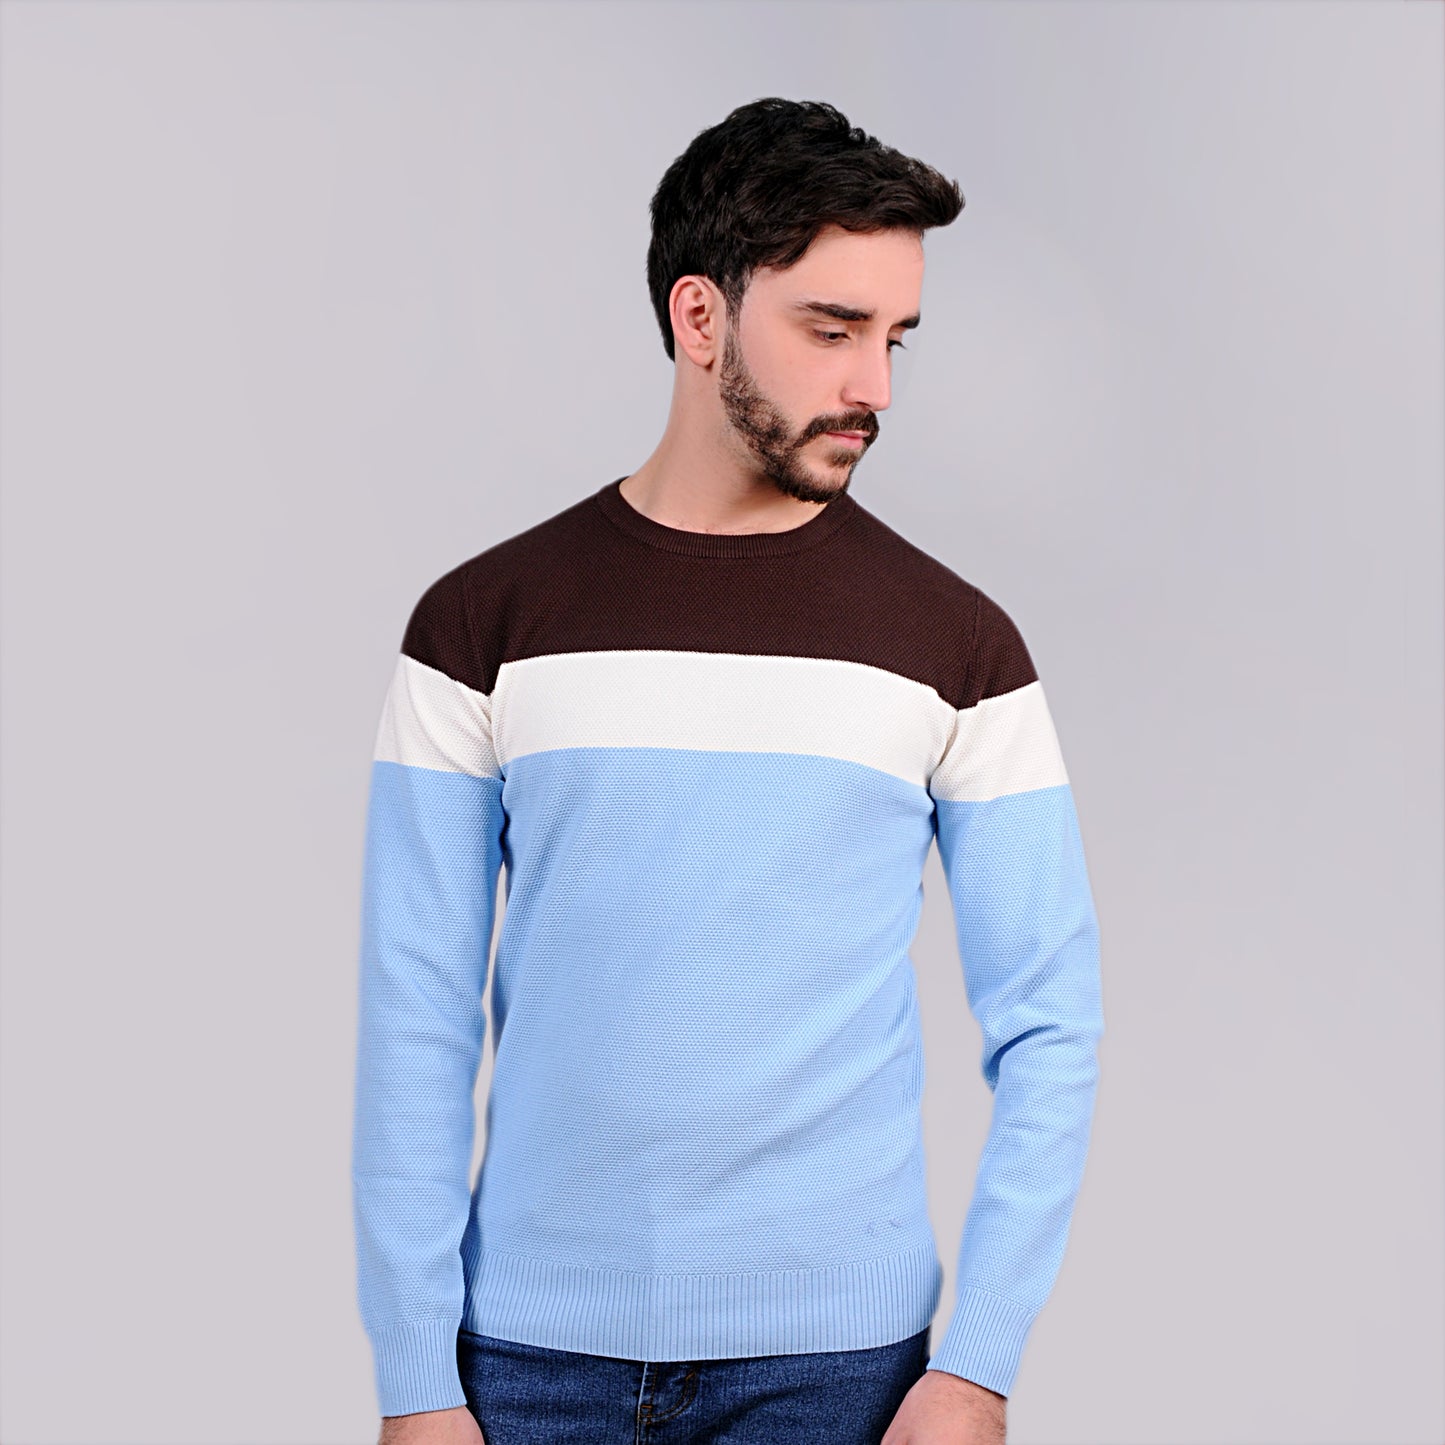 2H #46031 Colorful Brown/White/Blue Round Neck Sweater